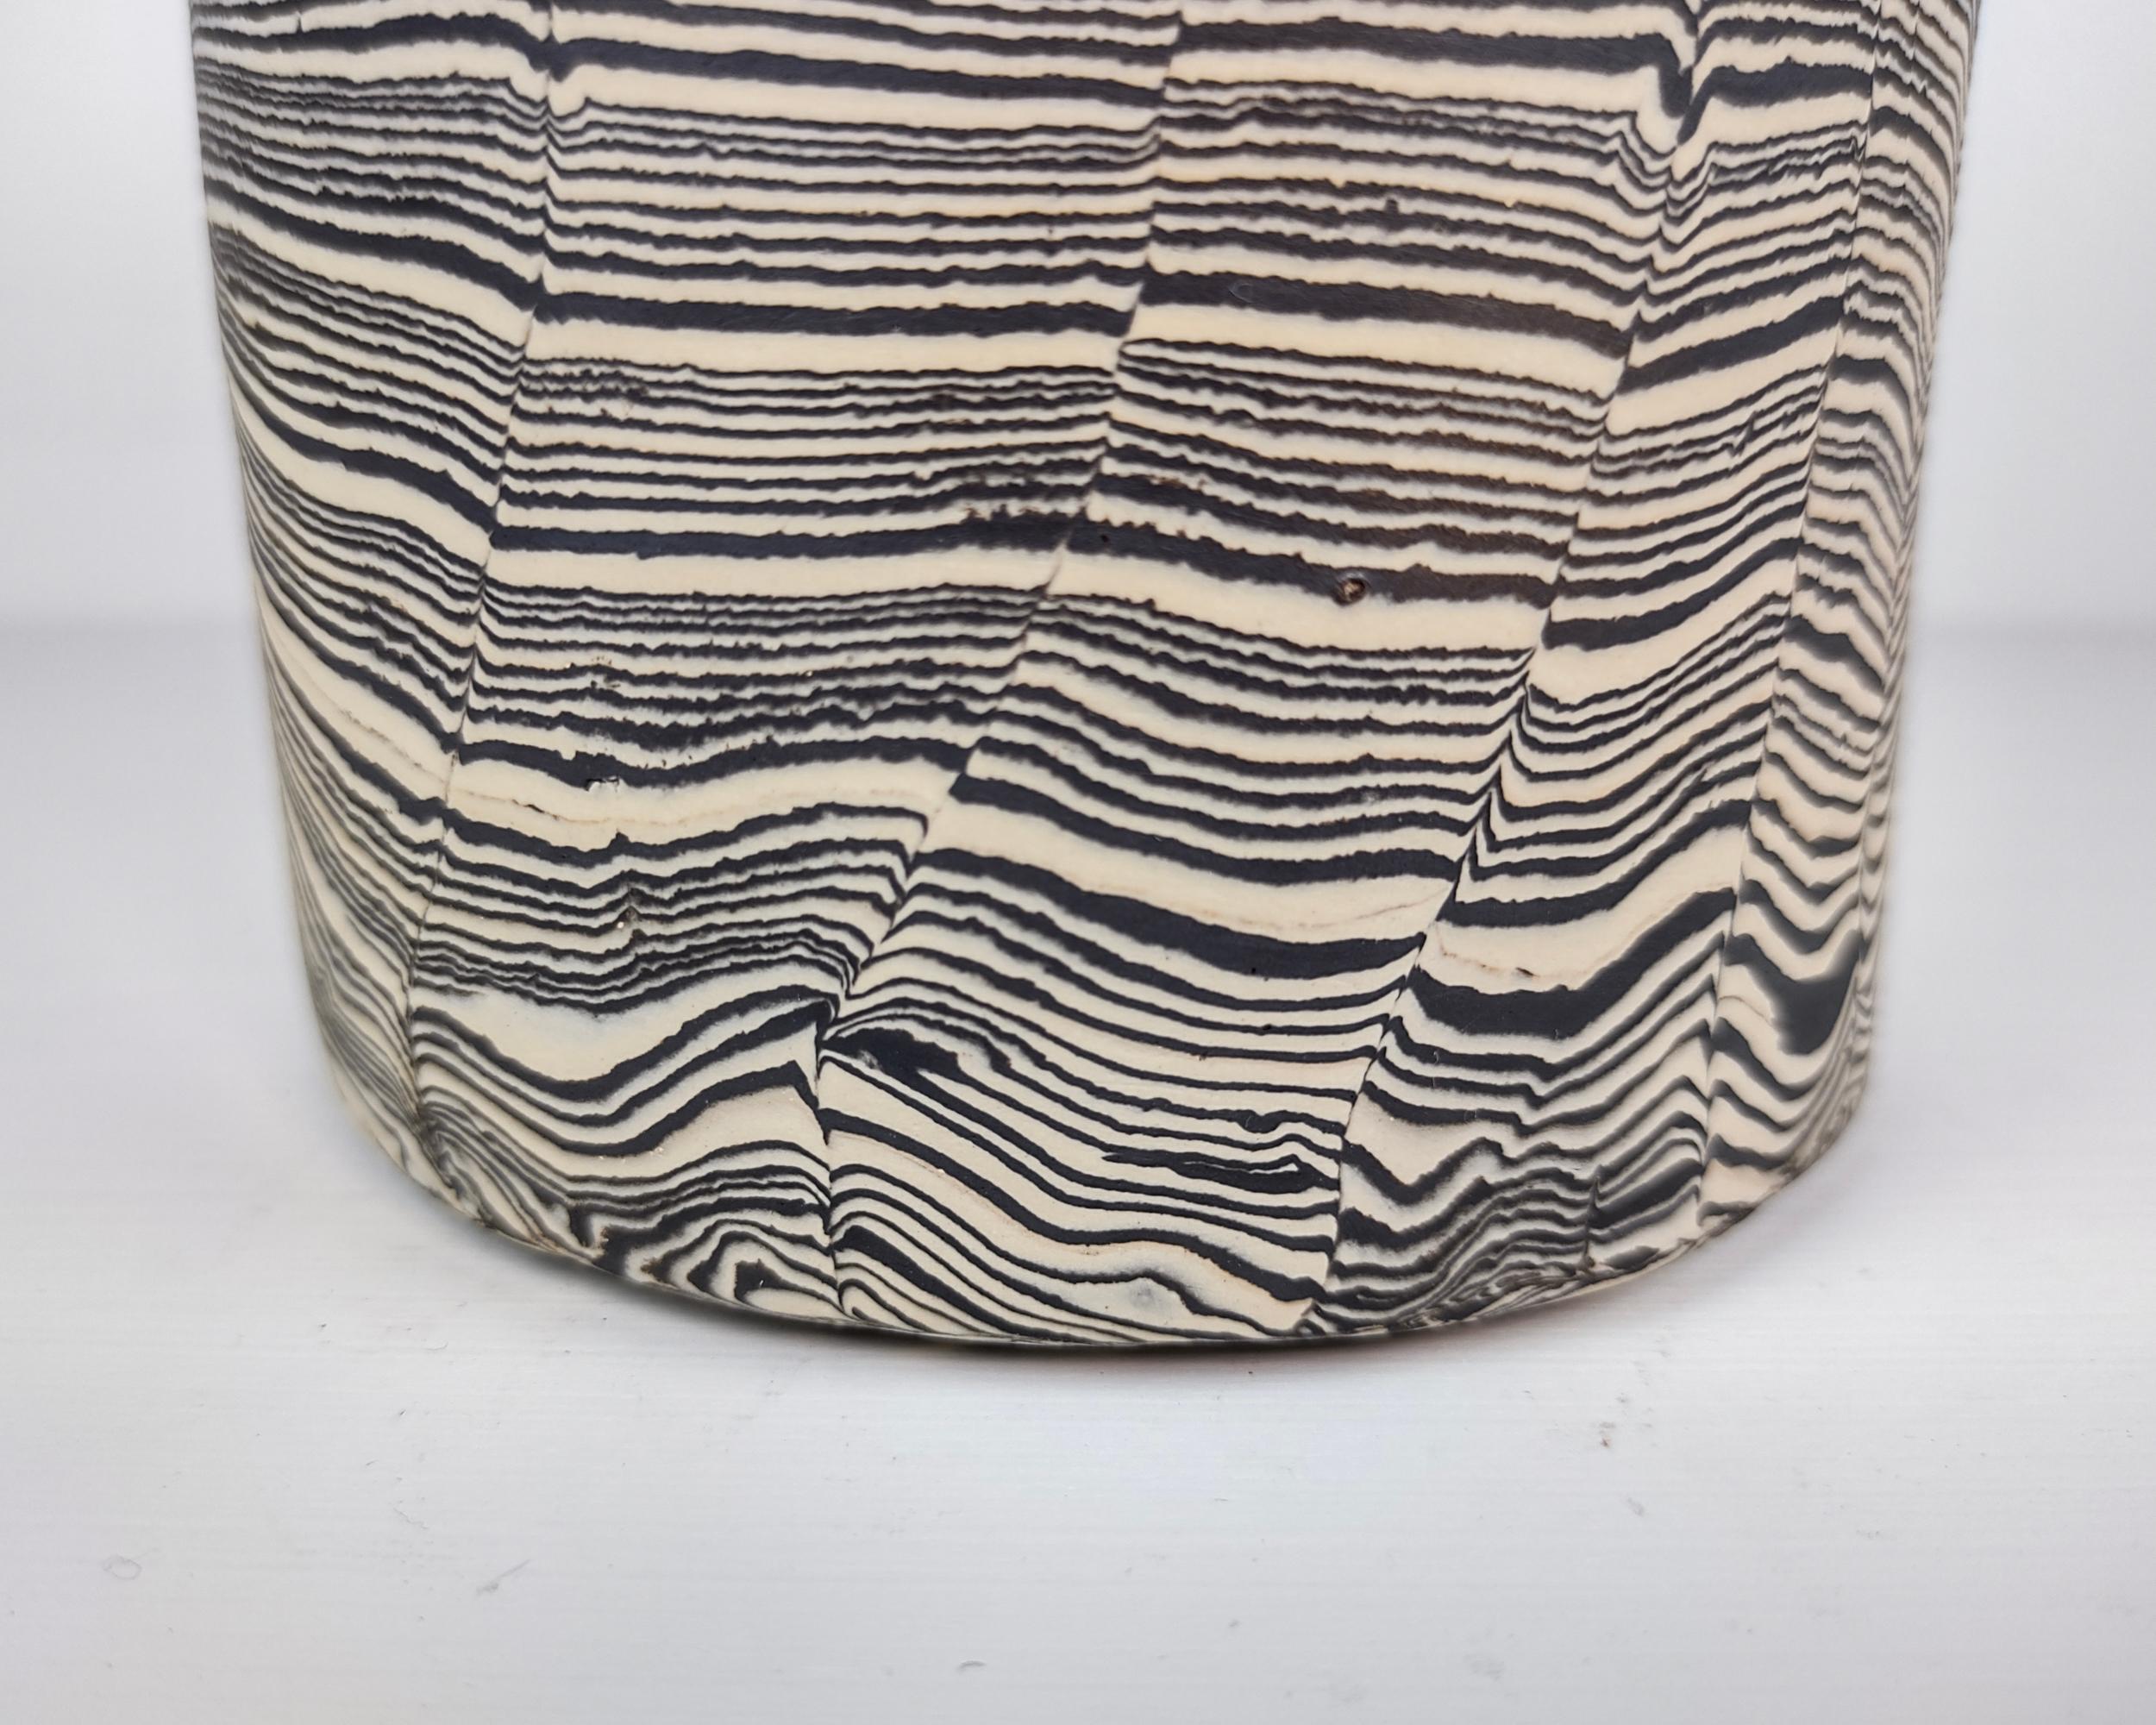 Hand-Crafted Wide Nerikomi Black and White Striped Vase by Fizzy Ceramics For Sale